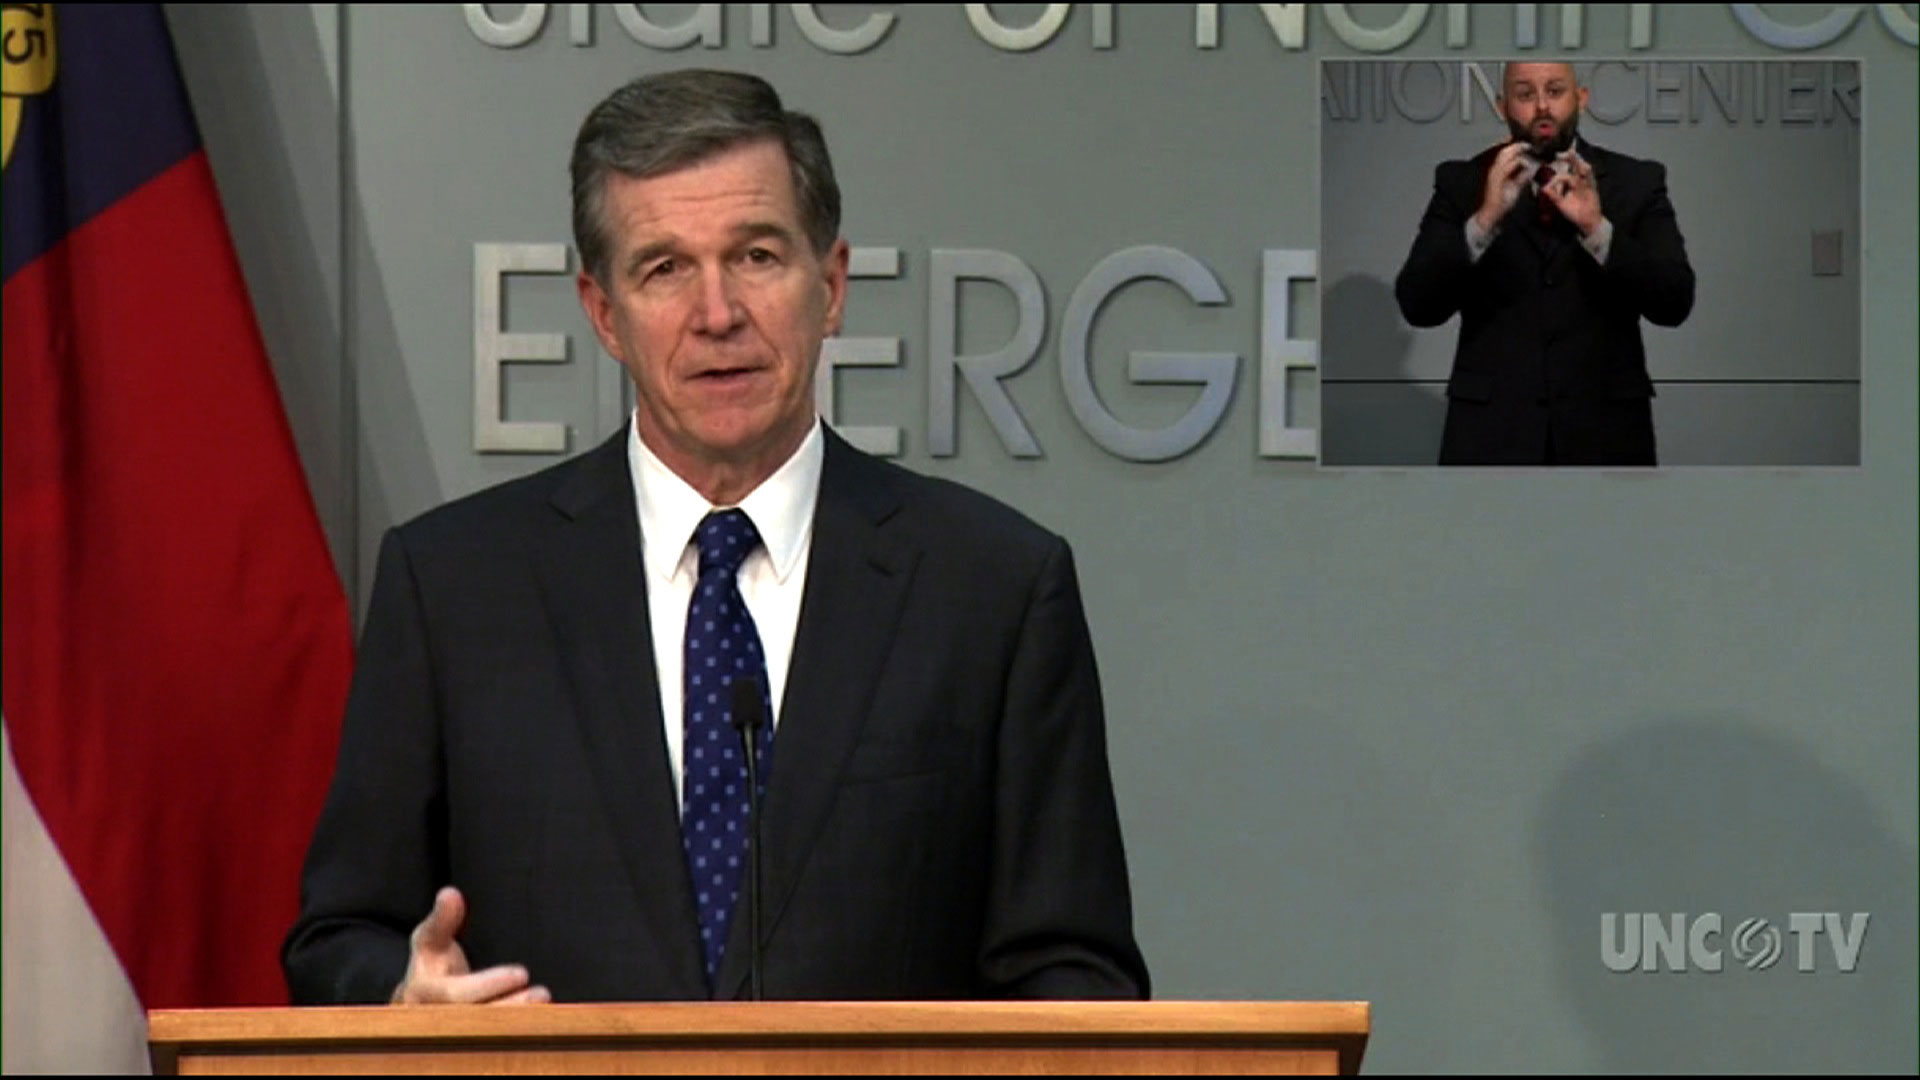 North Carolina Gov. Roy Cooper speaks at a news conference on Tuesday.